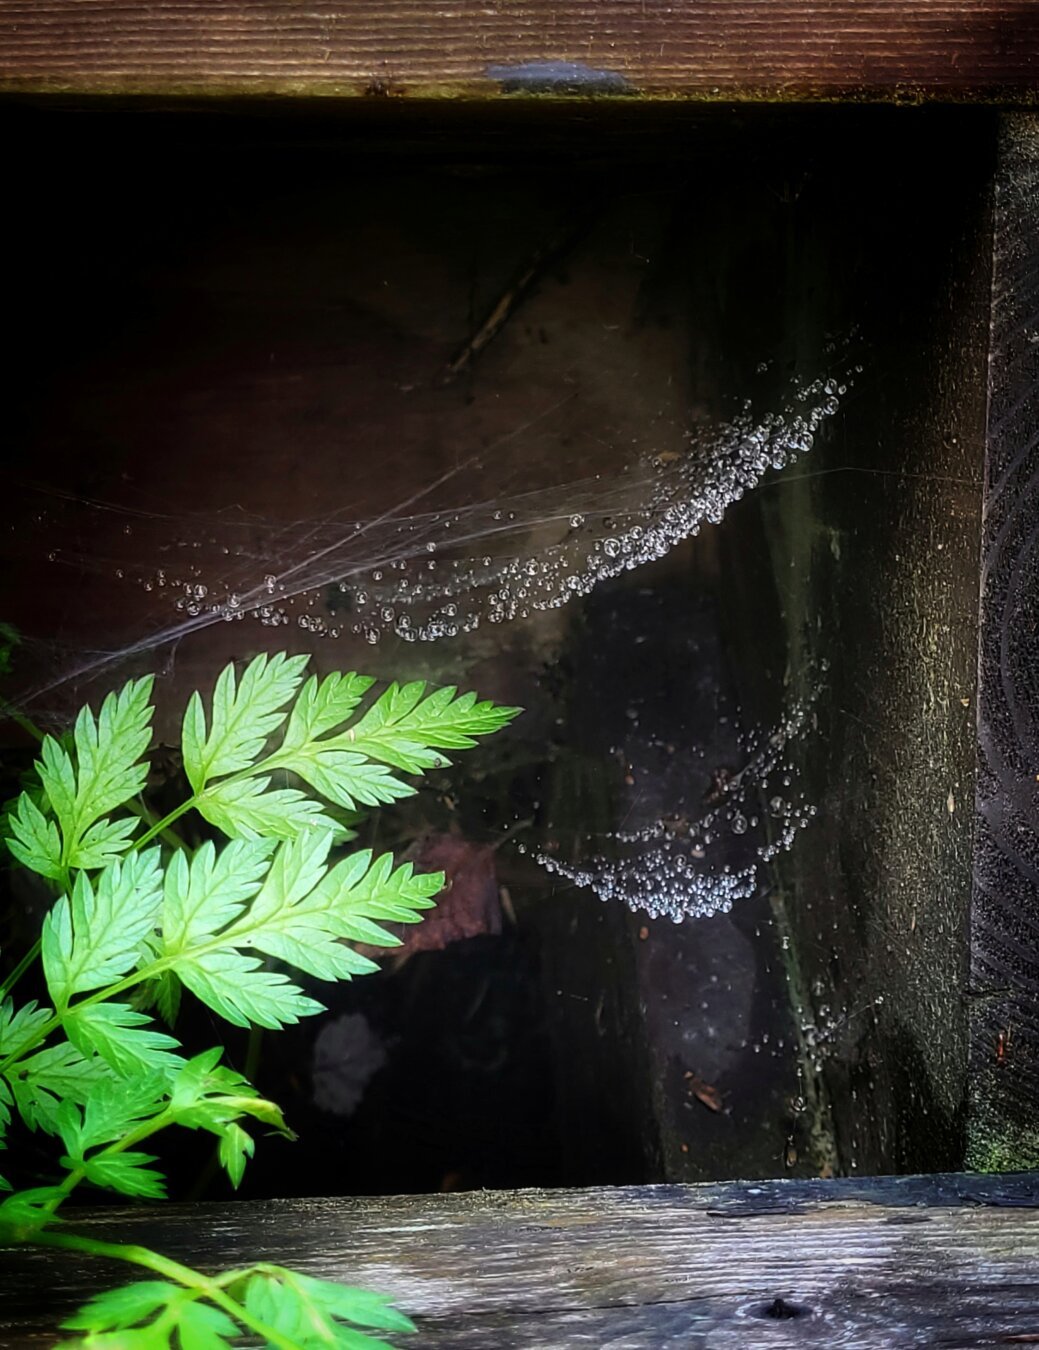 Water drops caught in spider webs under a wooden step. The drops shine in the indirect sunlight